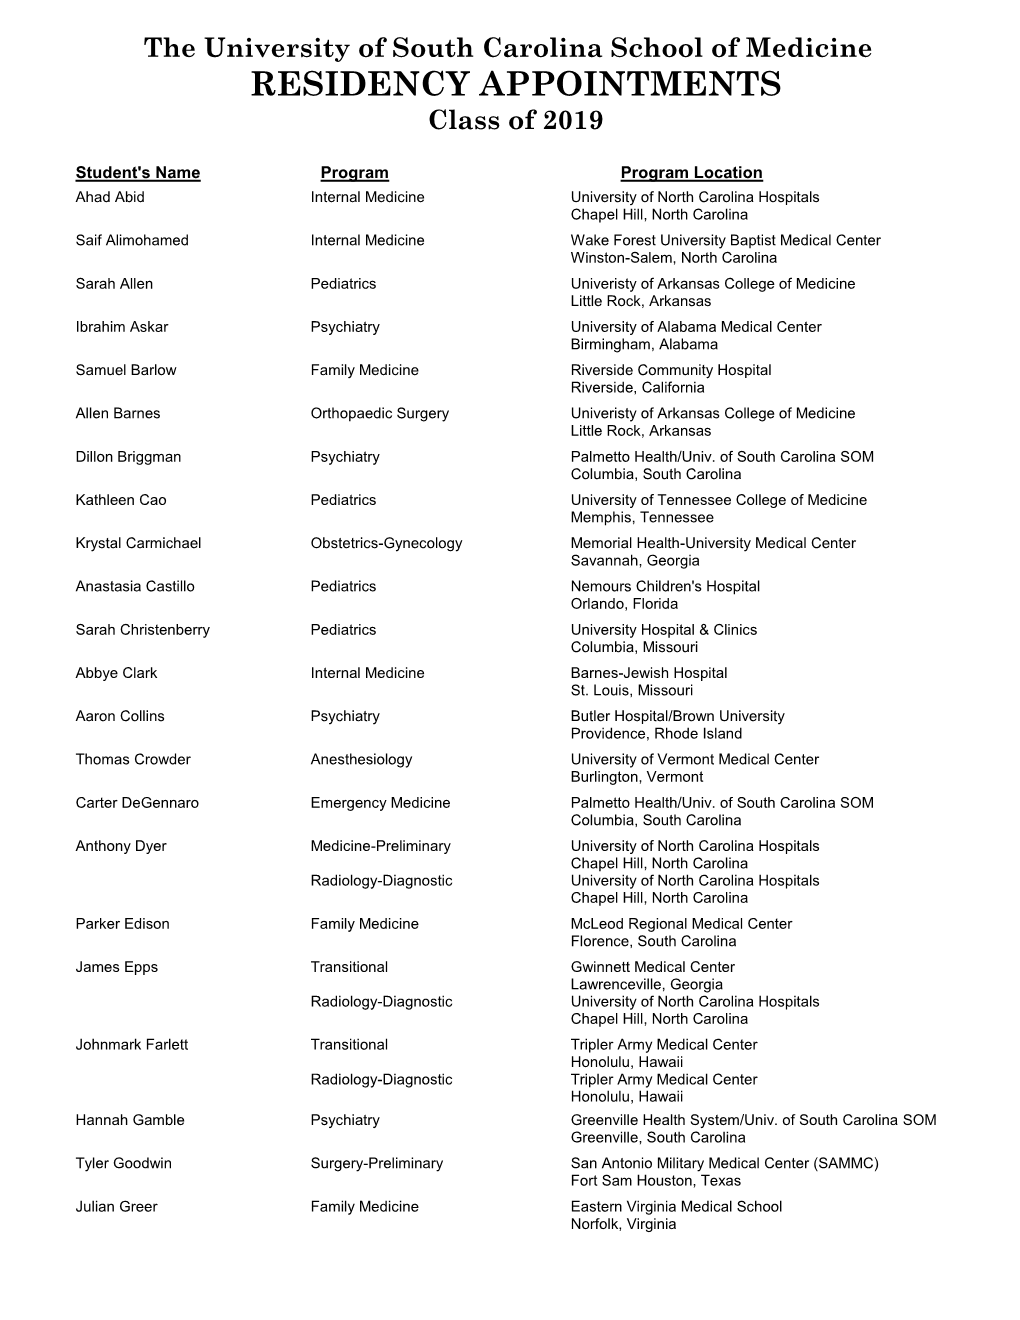 The University of South Carolina School of Medicine RESIDENCY APPOINTMENTS Class of 2019